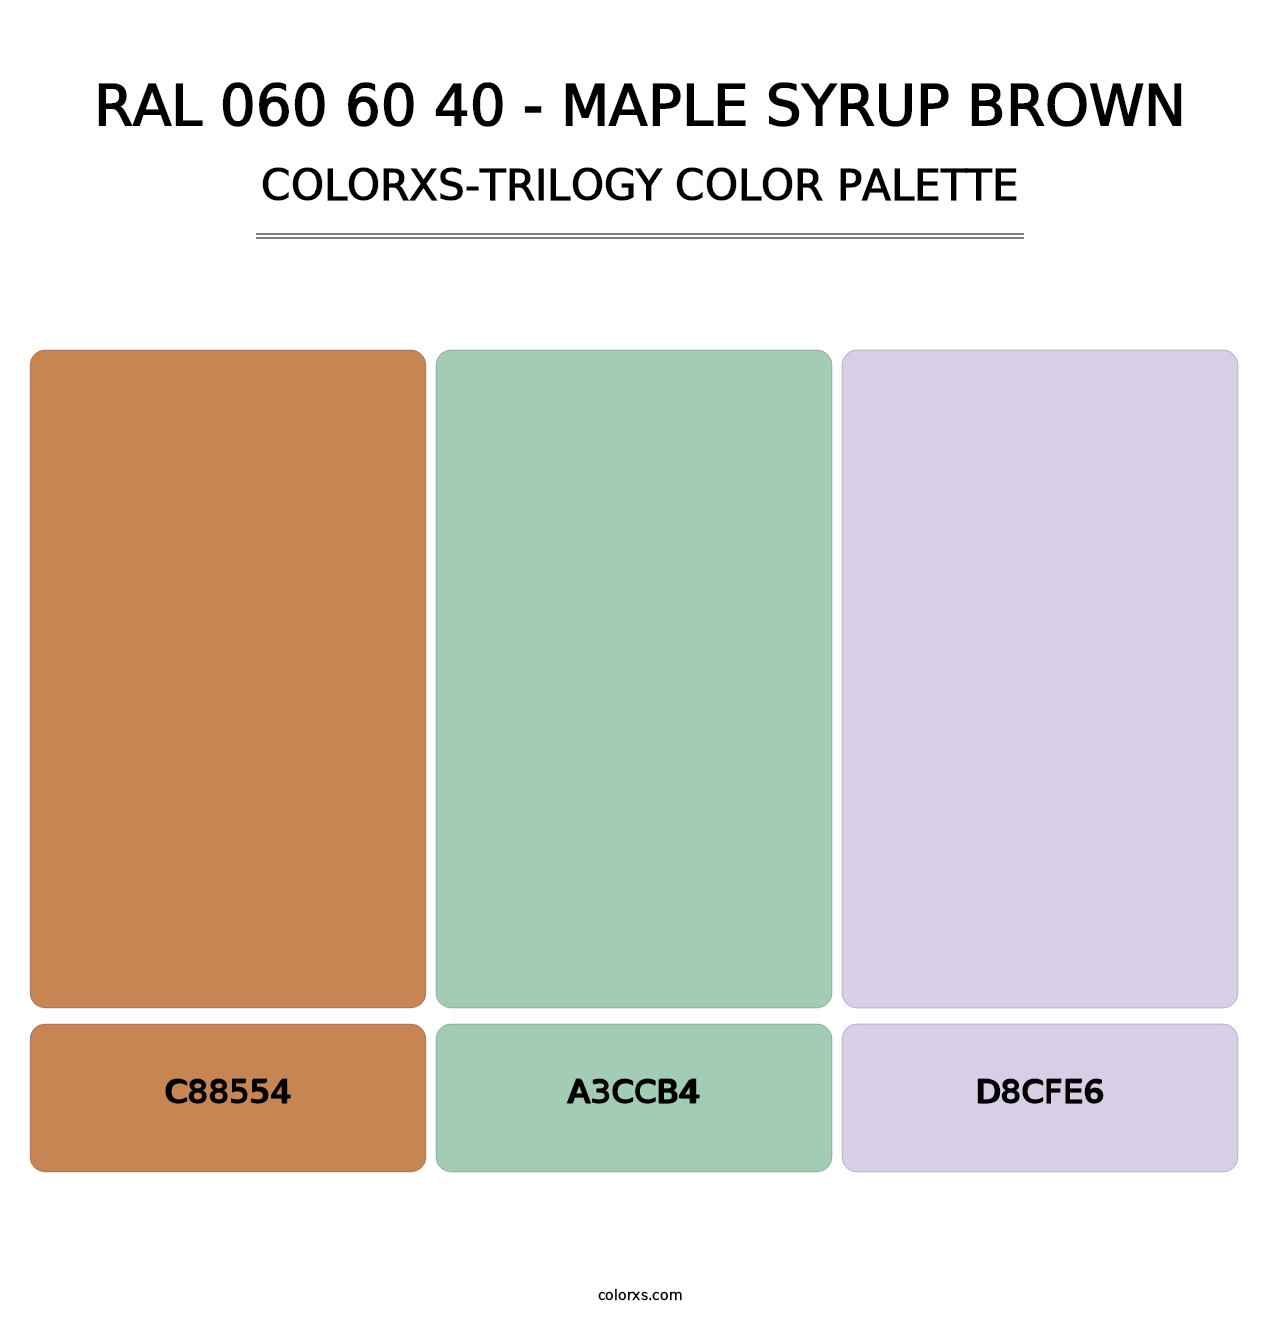 RAL 060 60 40 - Maple Syrup Brown - Colorxs Trilogy Palette